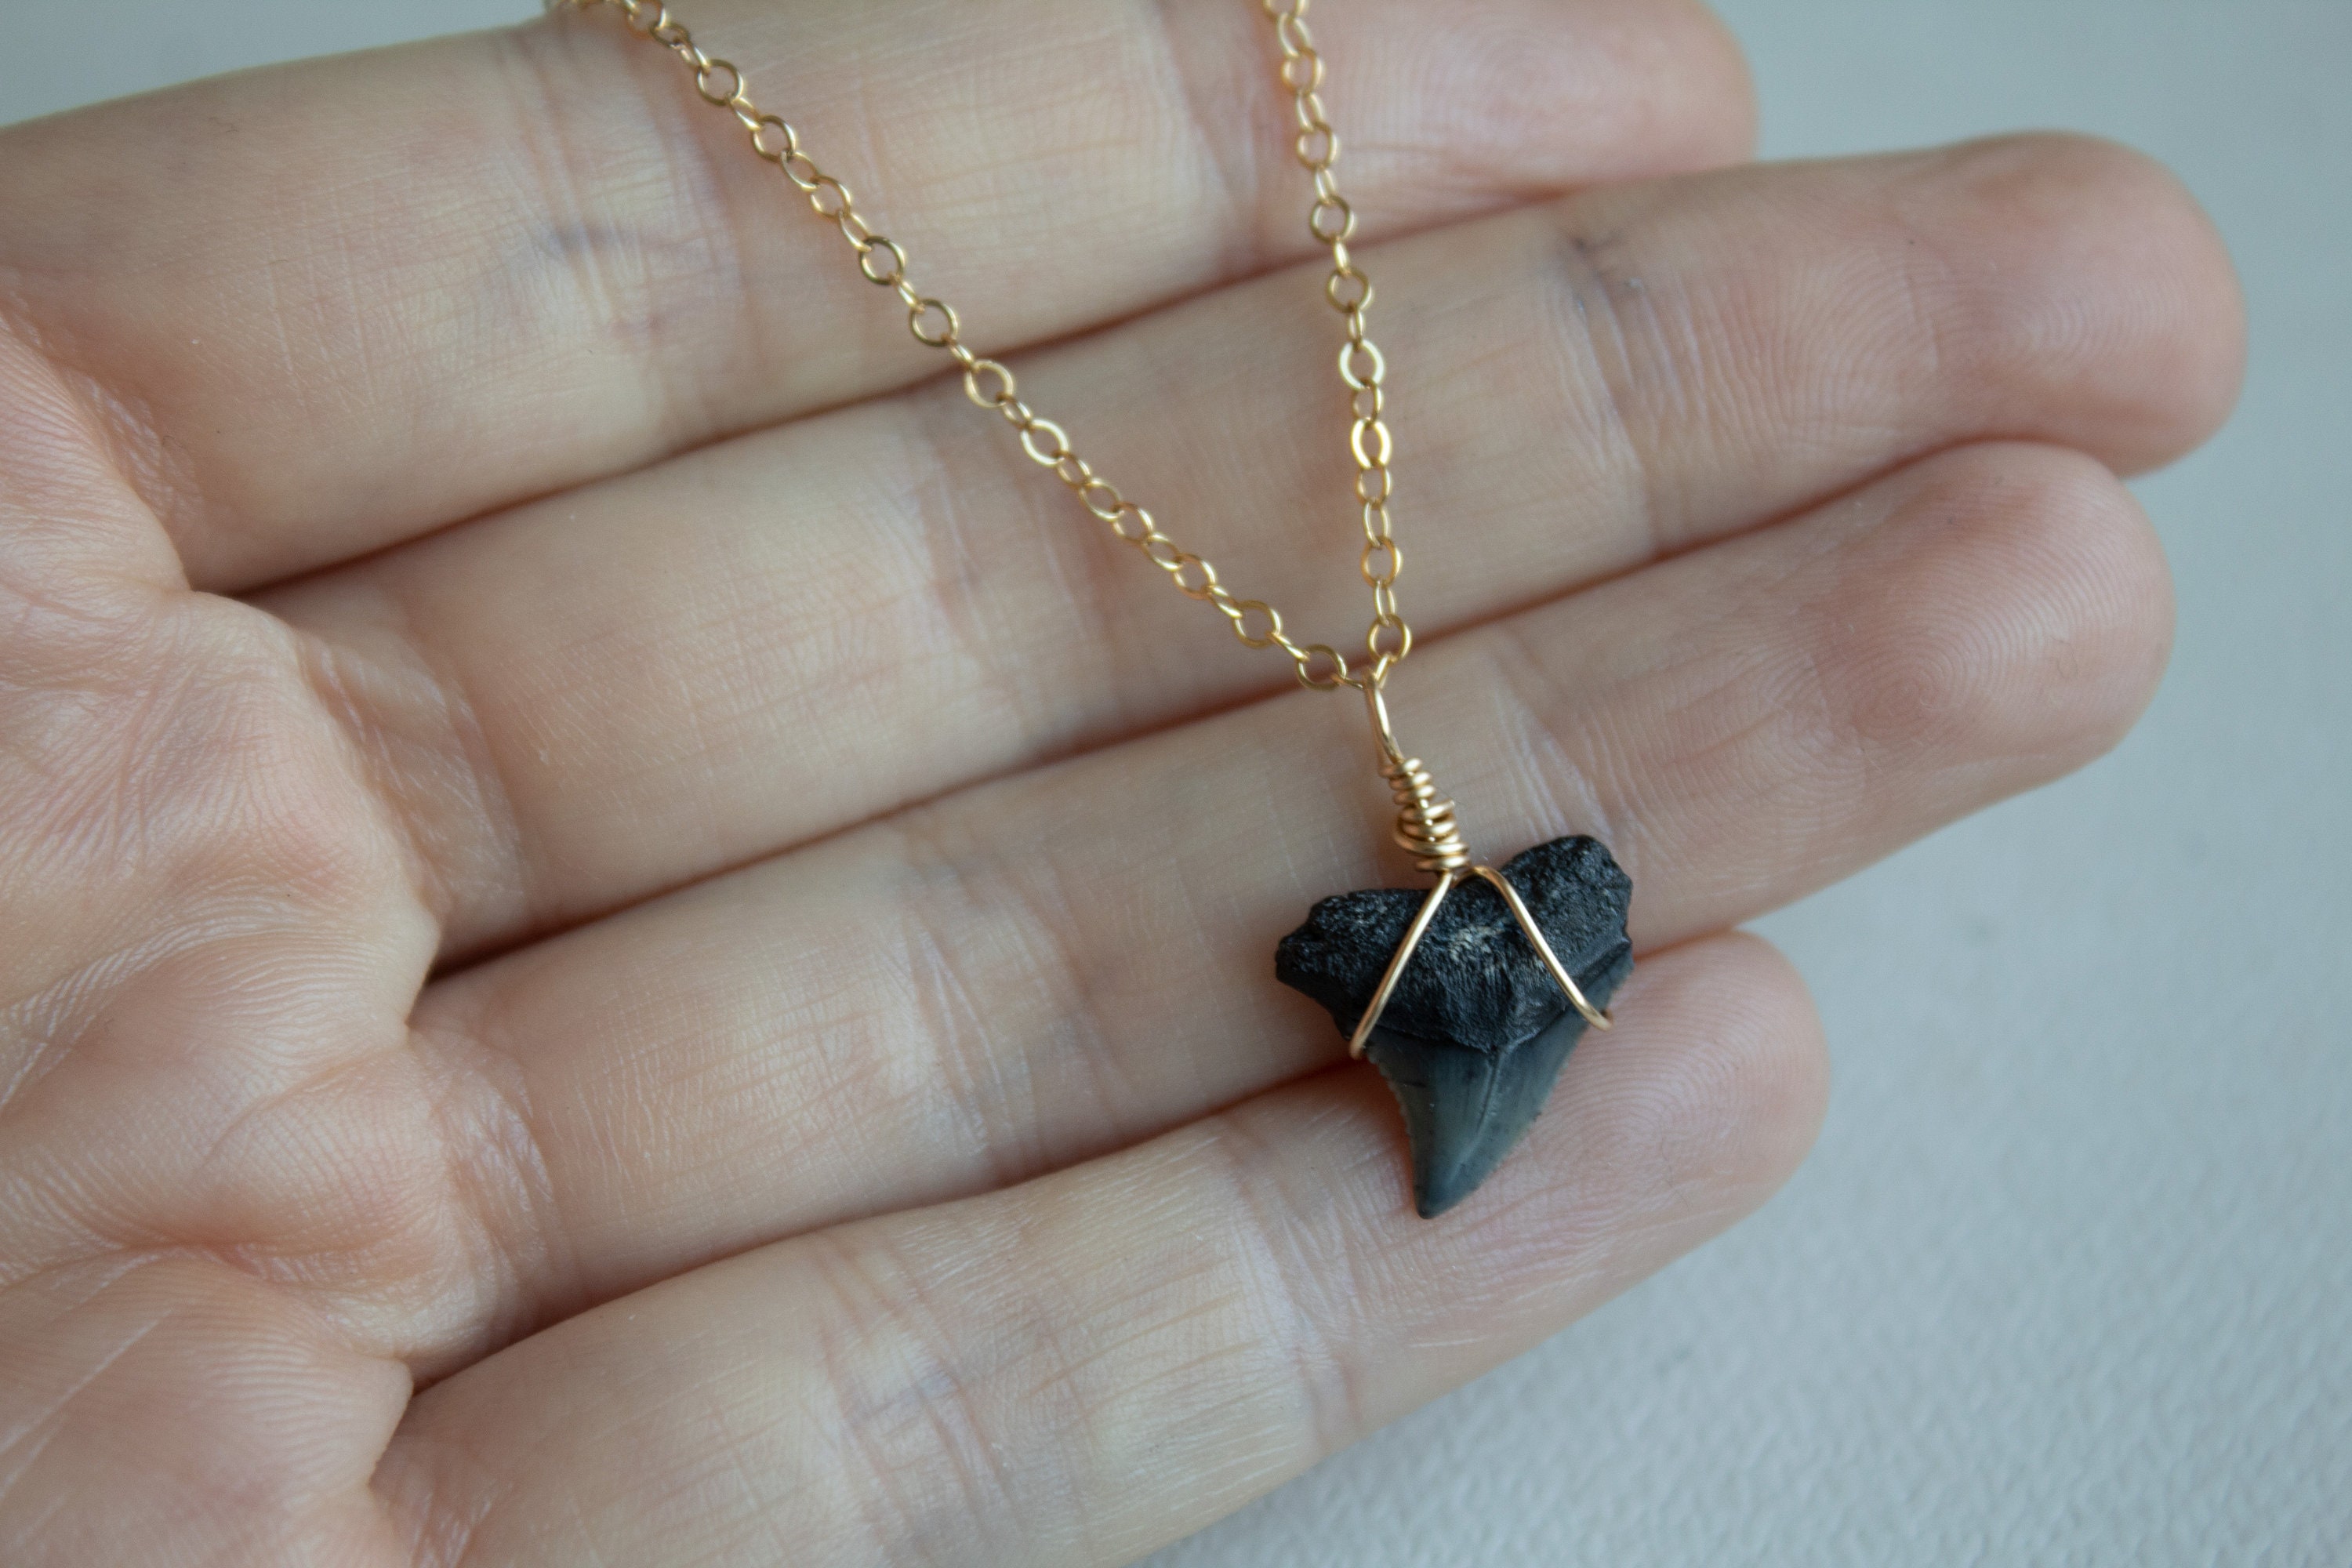 Shark Tooth Necklace With Black Beads – Real Shark Tooth Necklaces